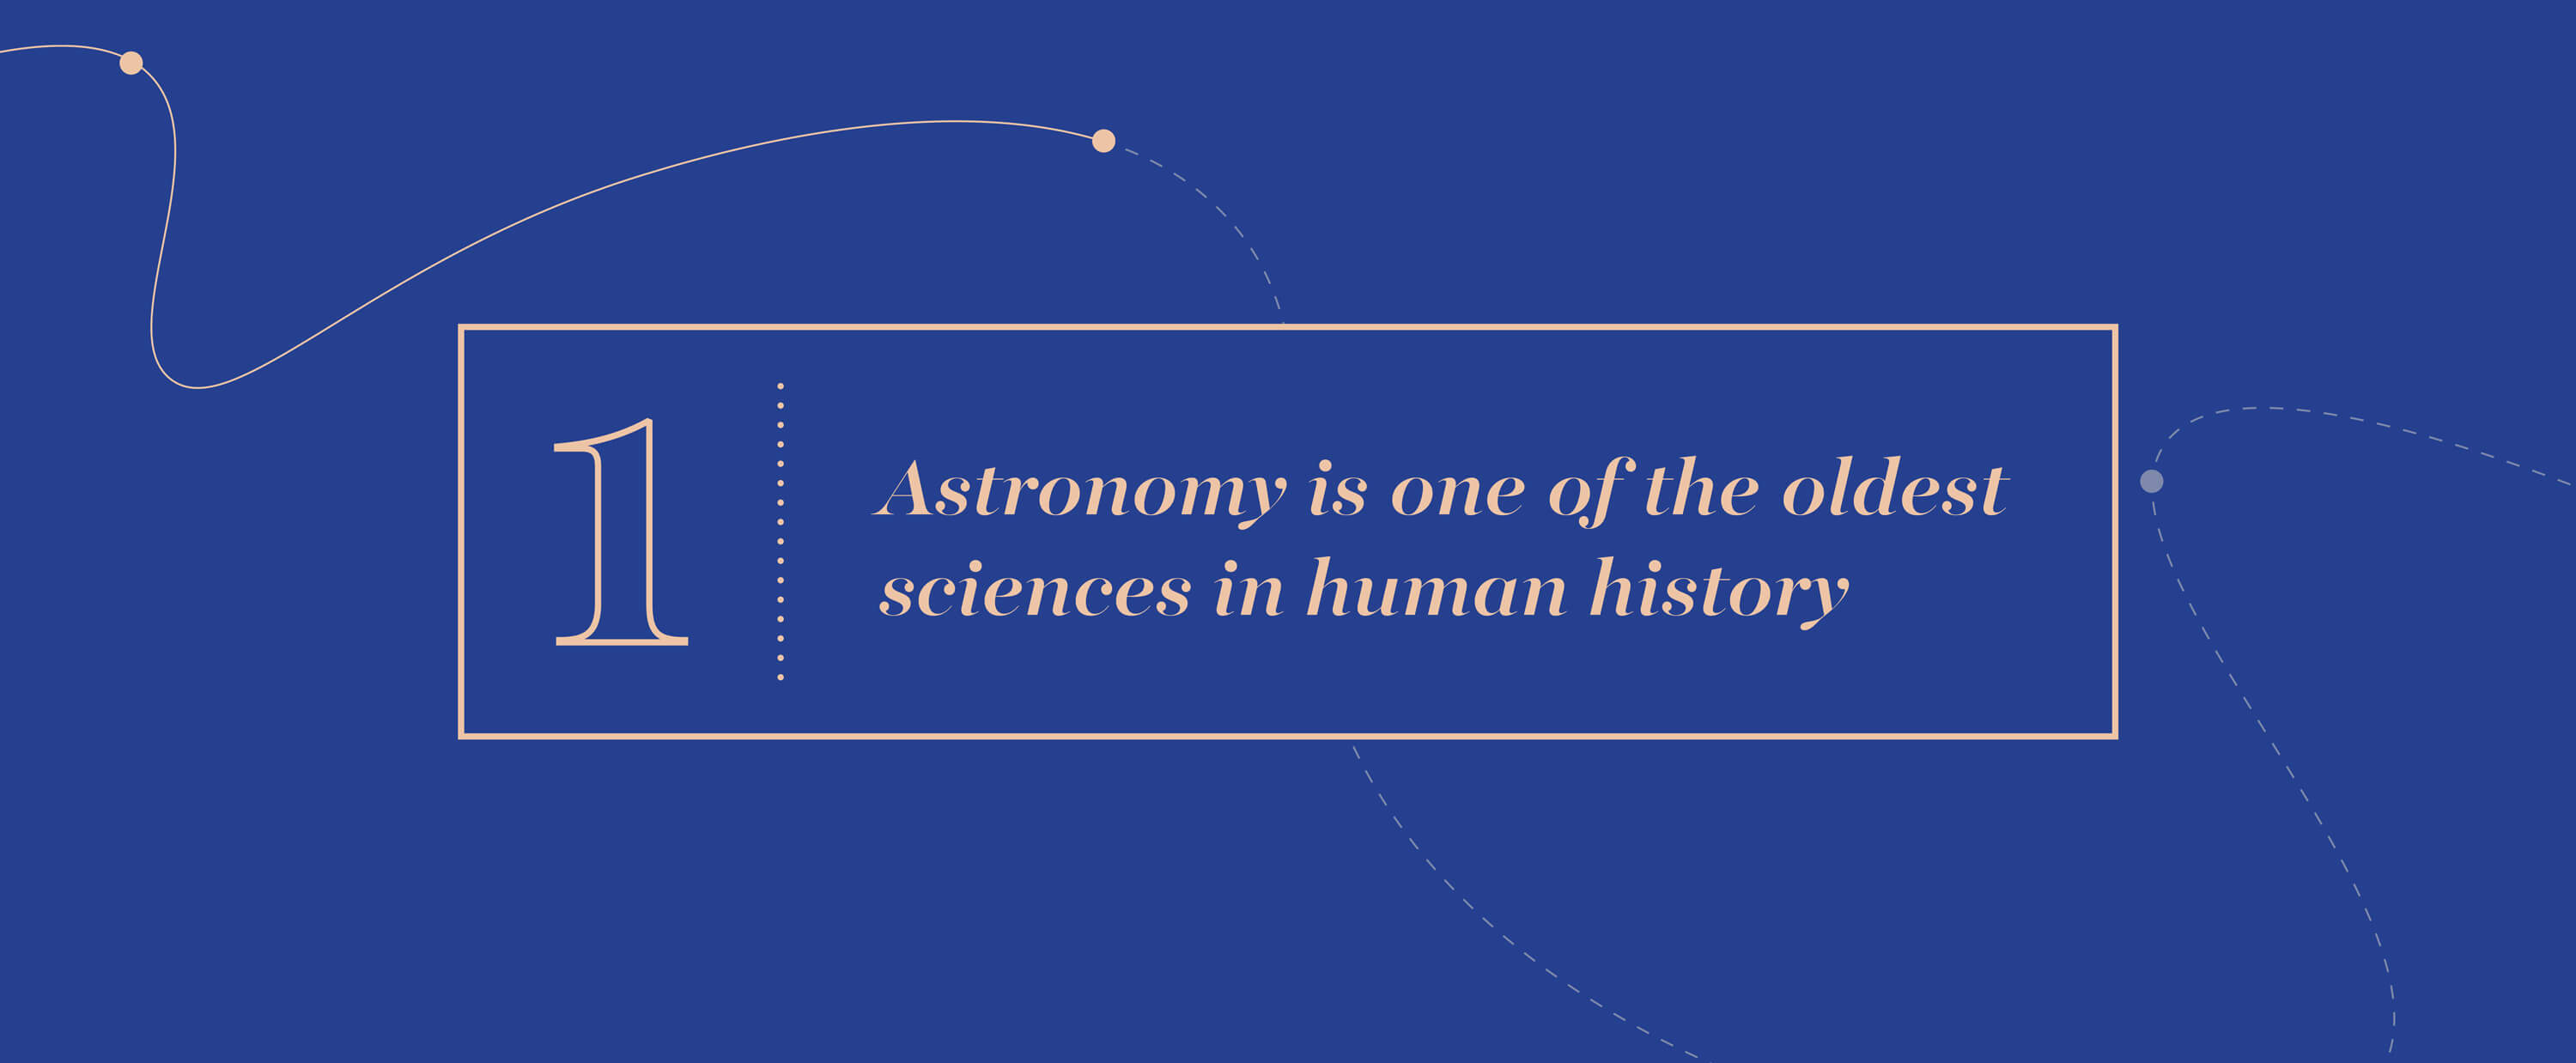 Big Idea 1 - Astronomy is one of the oldest sciences in human history